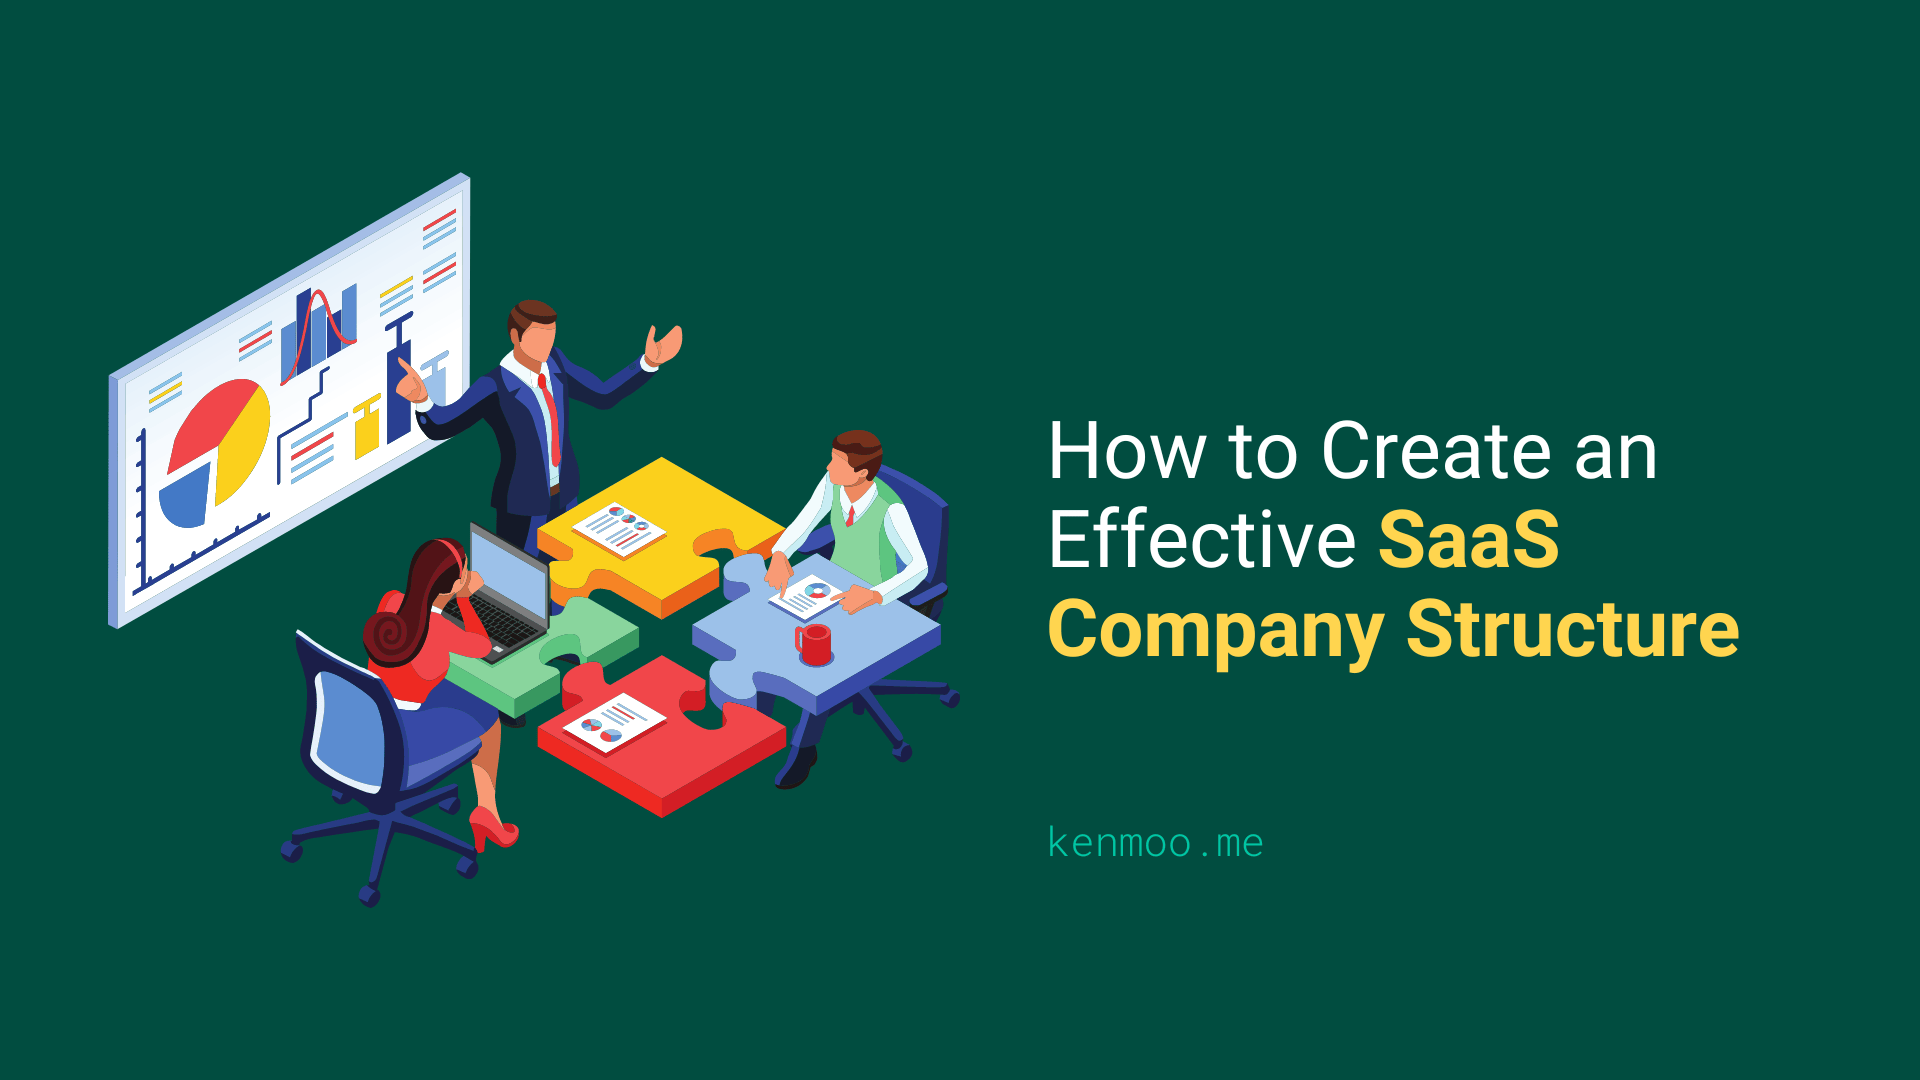 How to Create an Effective SaaS Company Structure